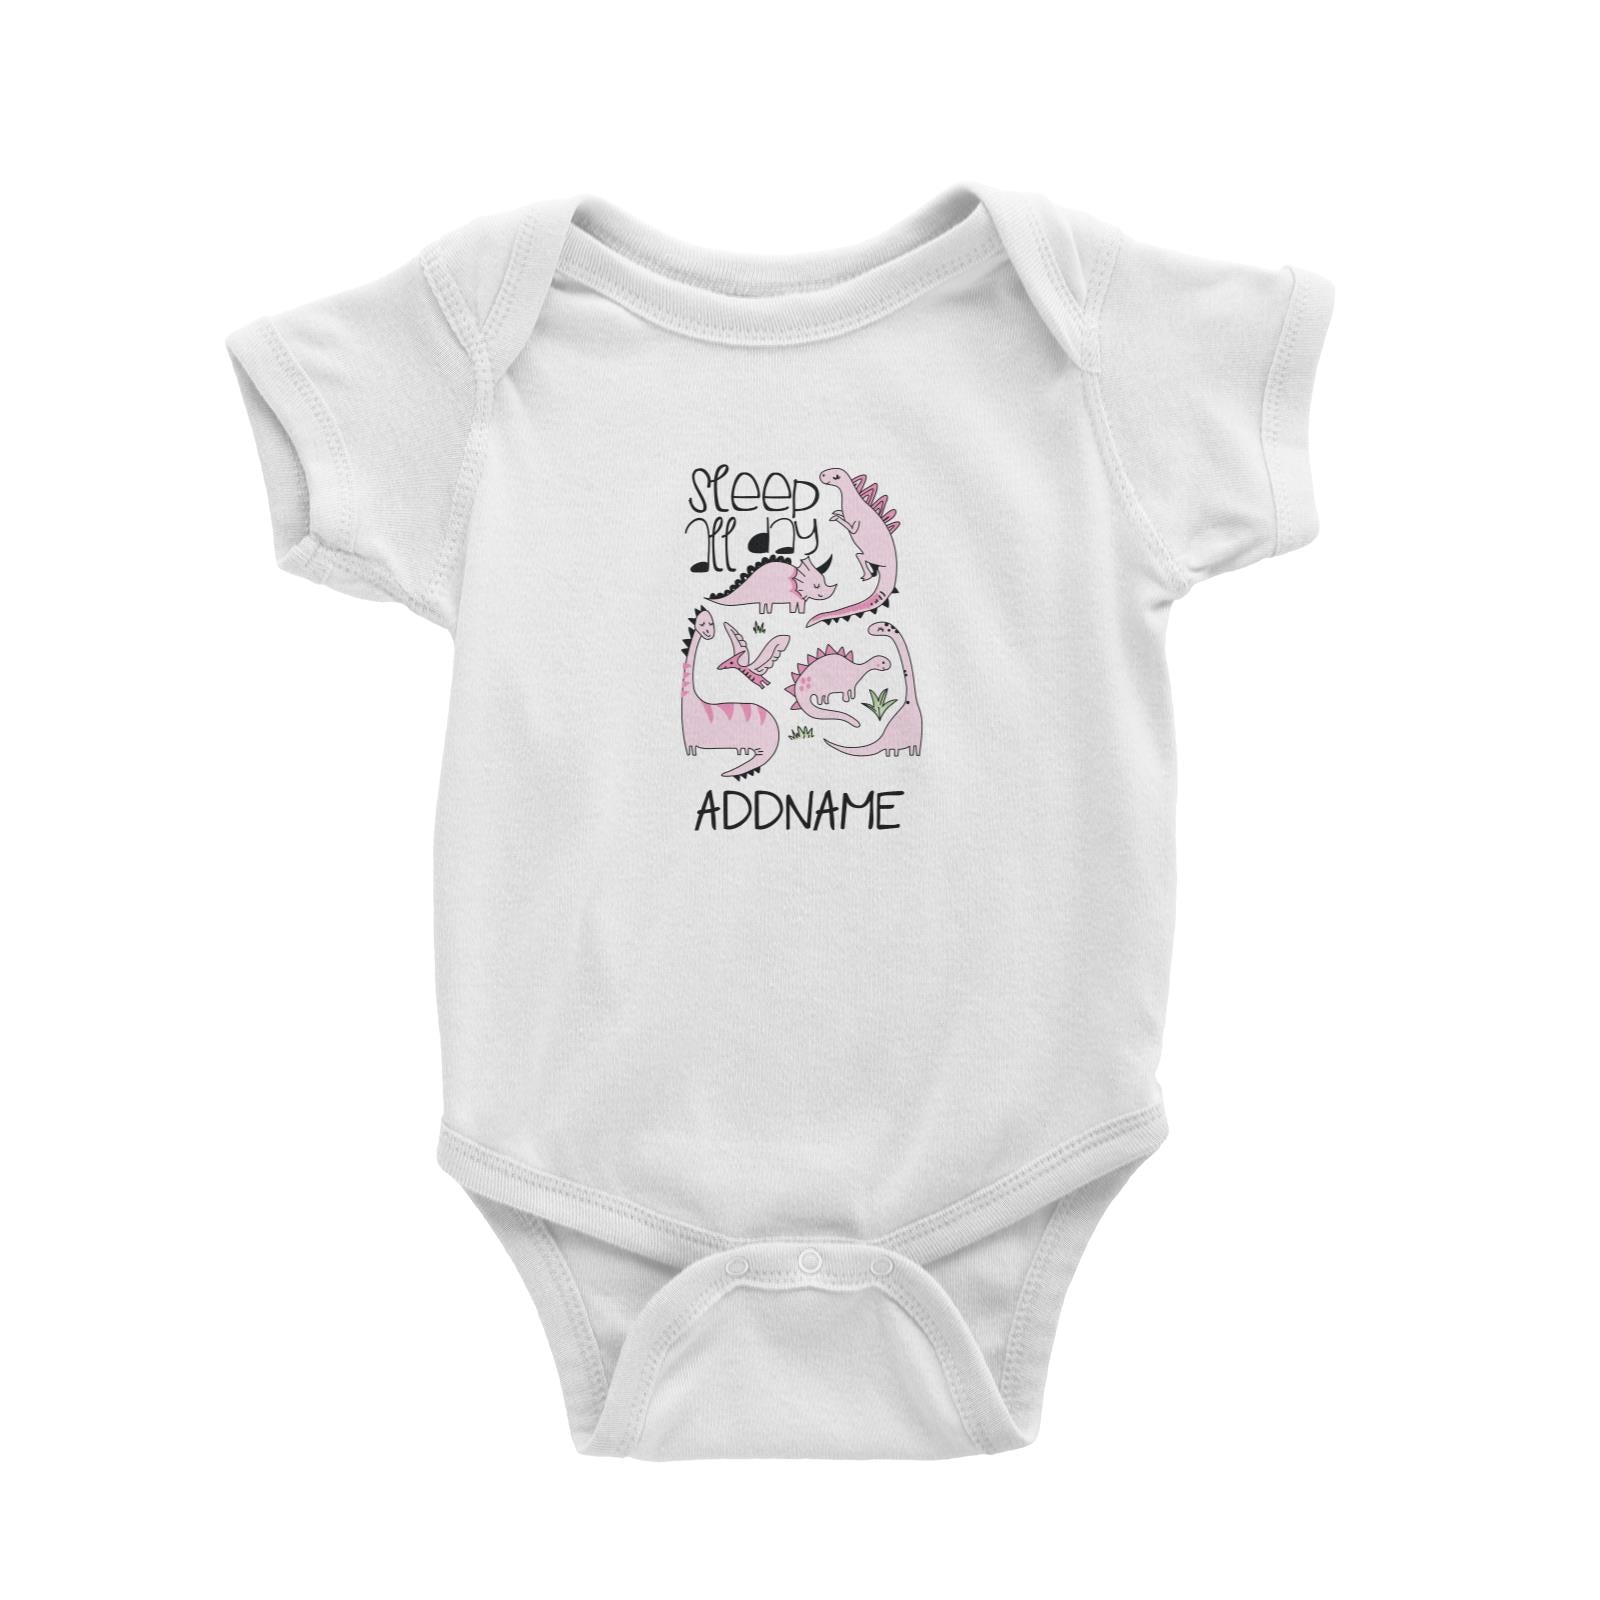 Cool Vibrant Series Sleep All Day Dinosaur Addname Baby Romper [SALE]